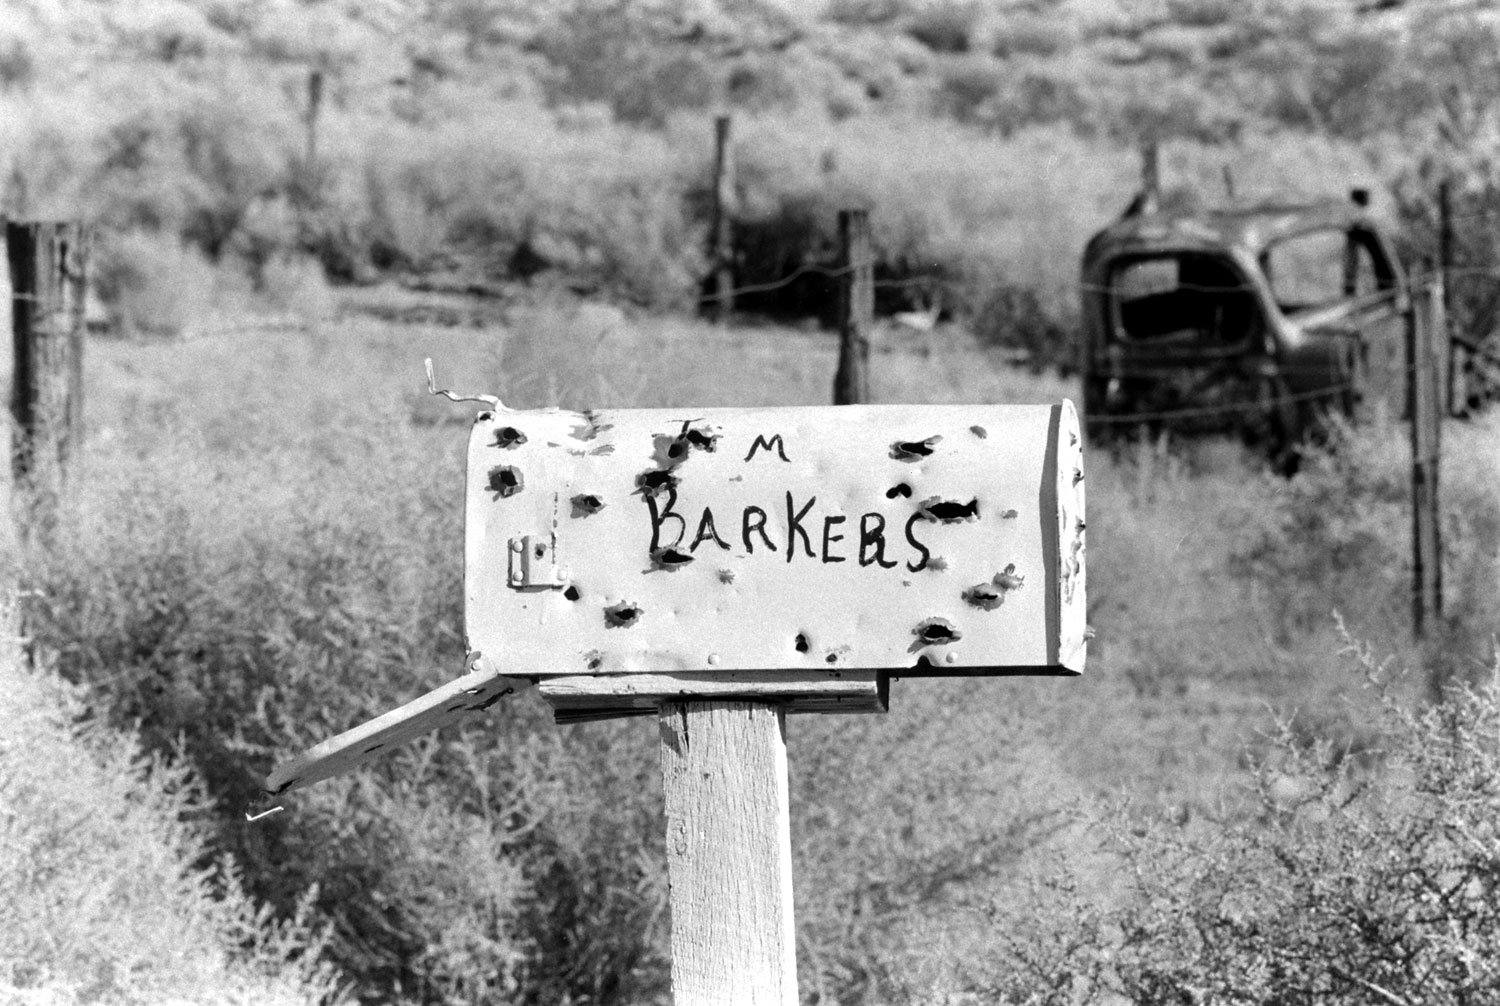 Barker Ranch, one-time home of the Manson Family.